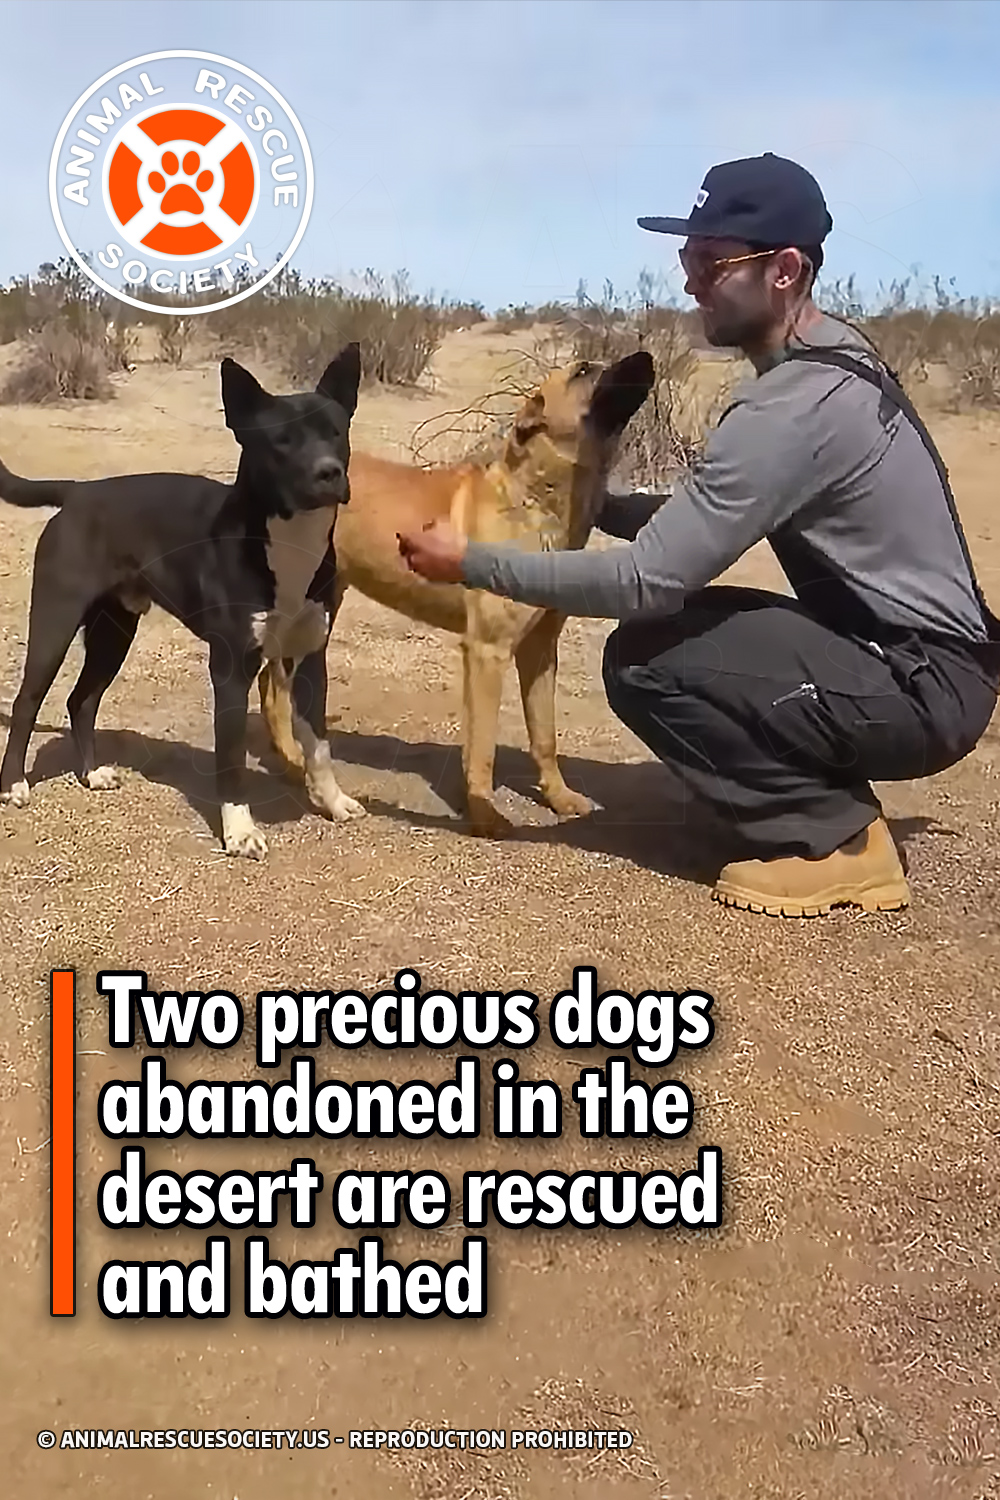 Two precious dogs abandoned in the desert are rescued and bathed